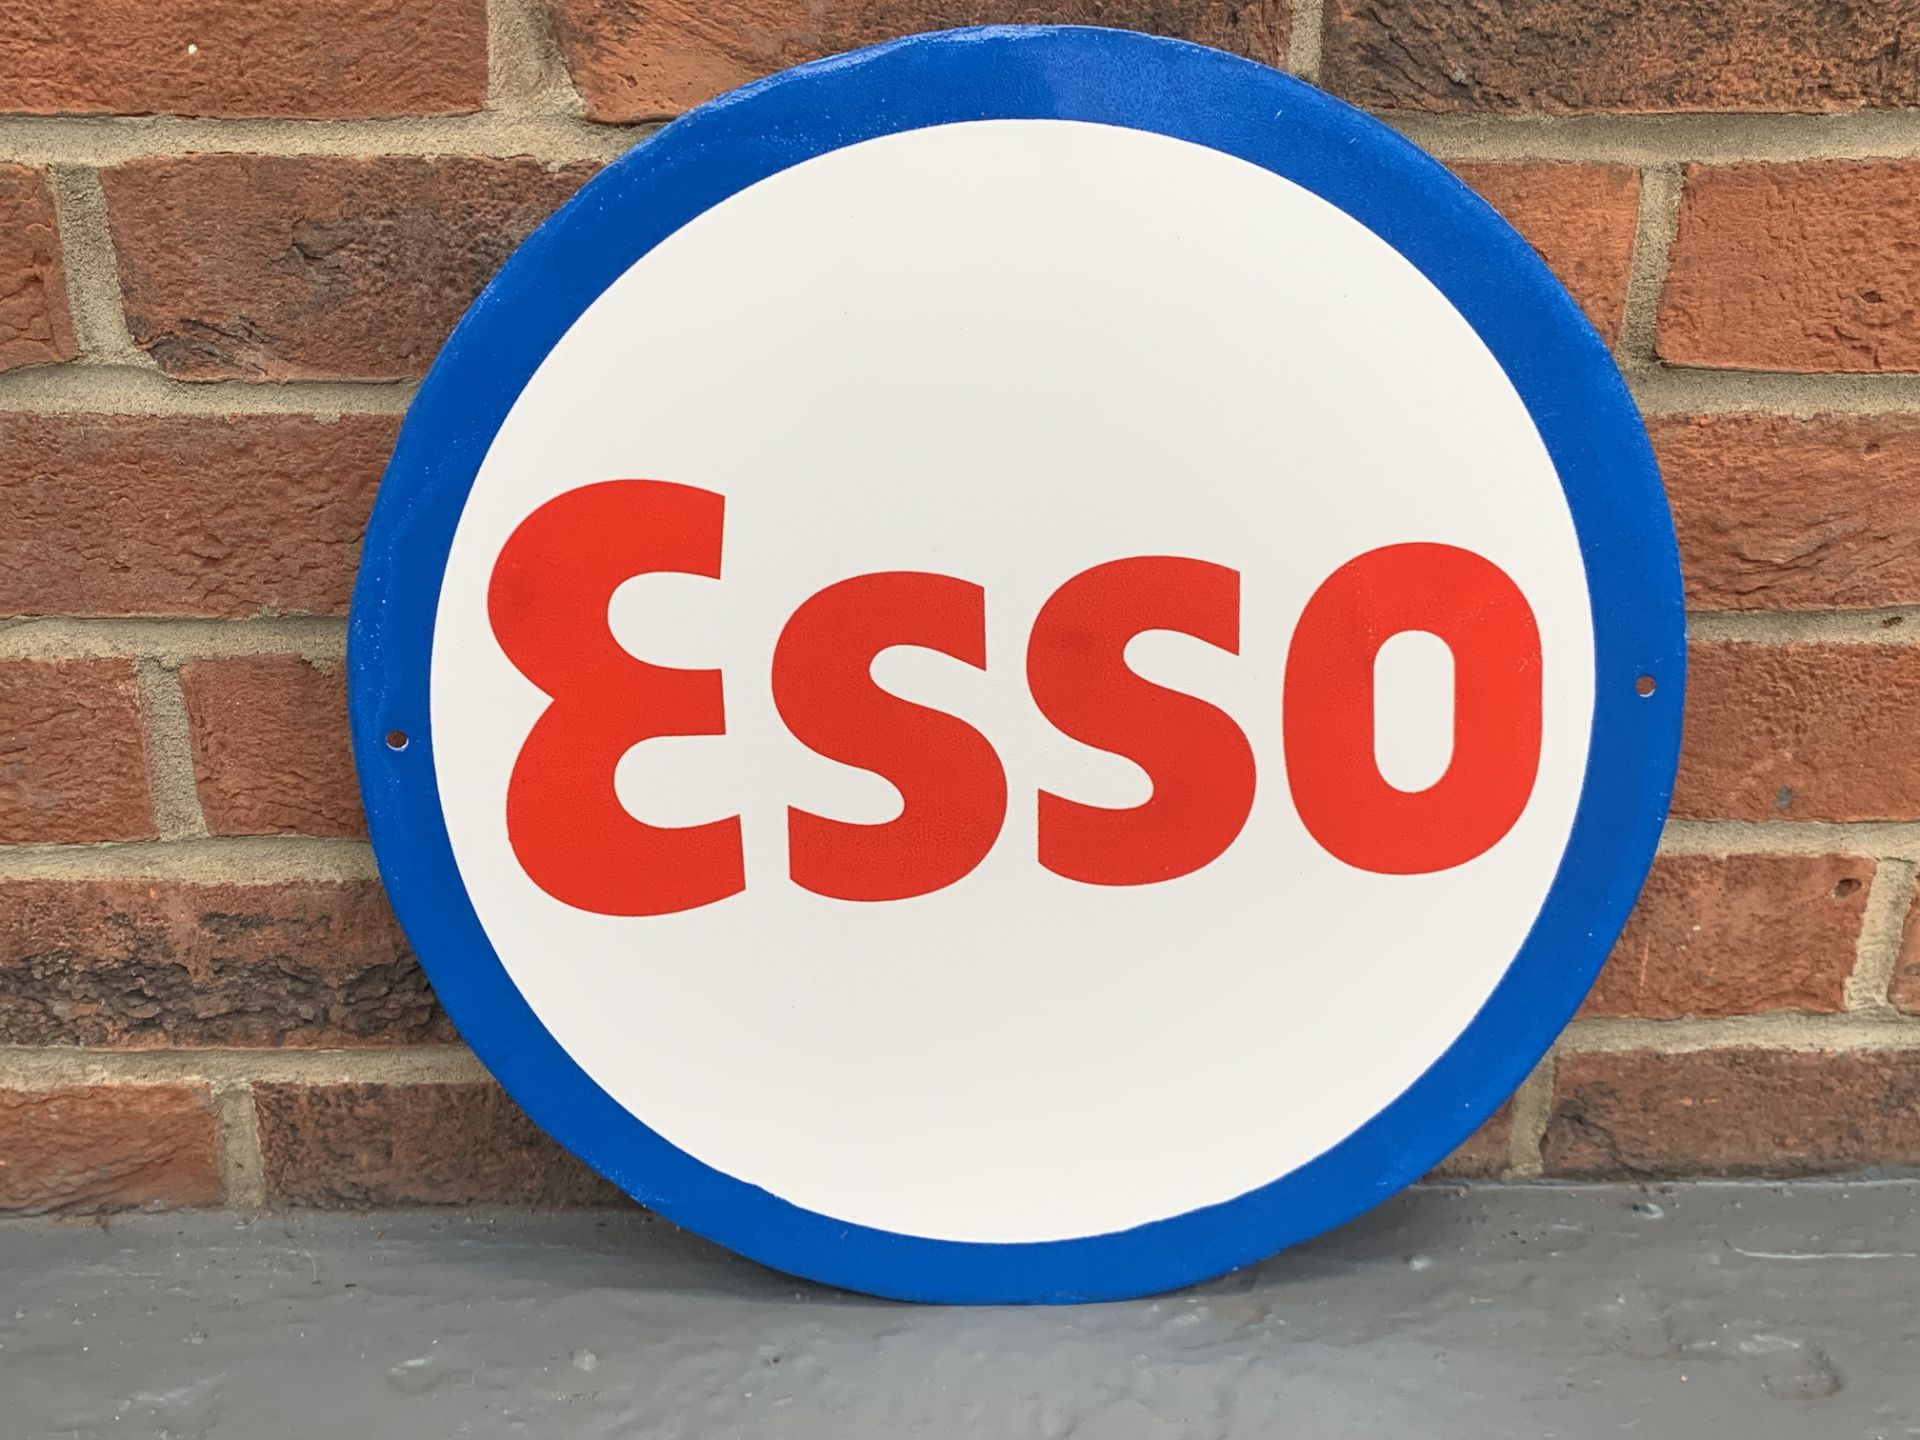 Metal Circular Shell & Esso Sign (2) - Image 3 of 4